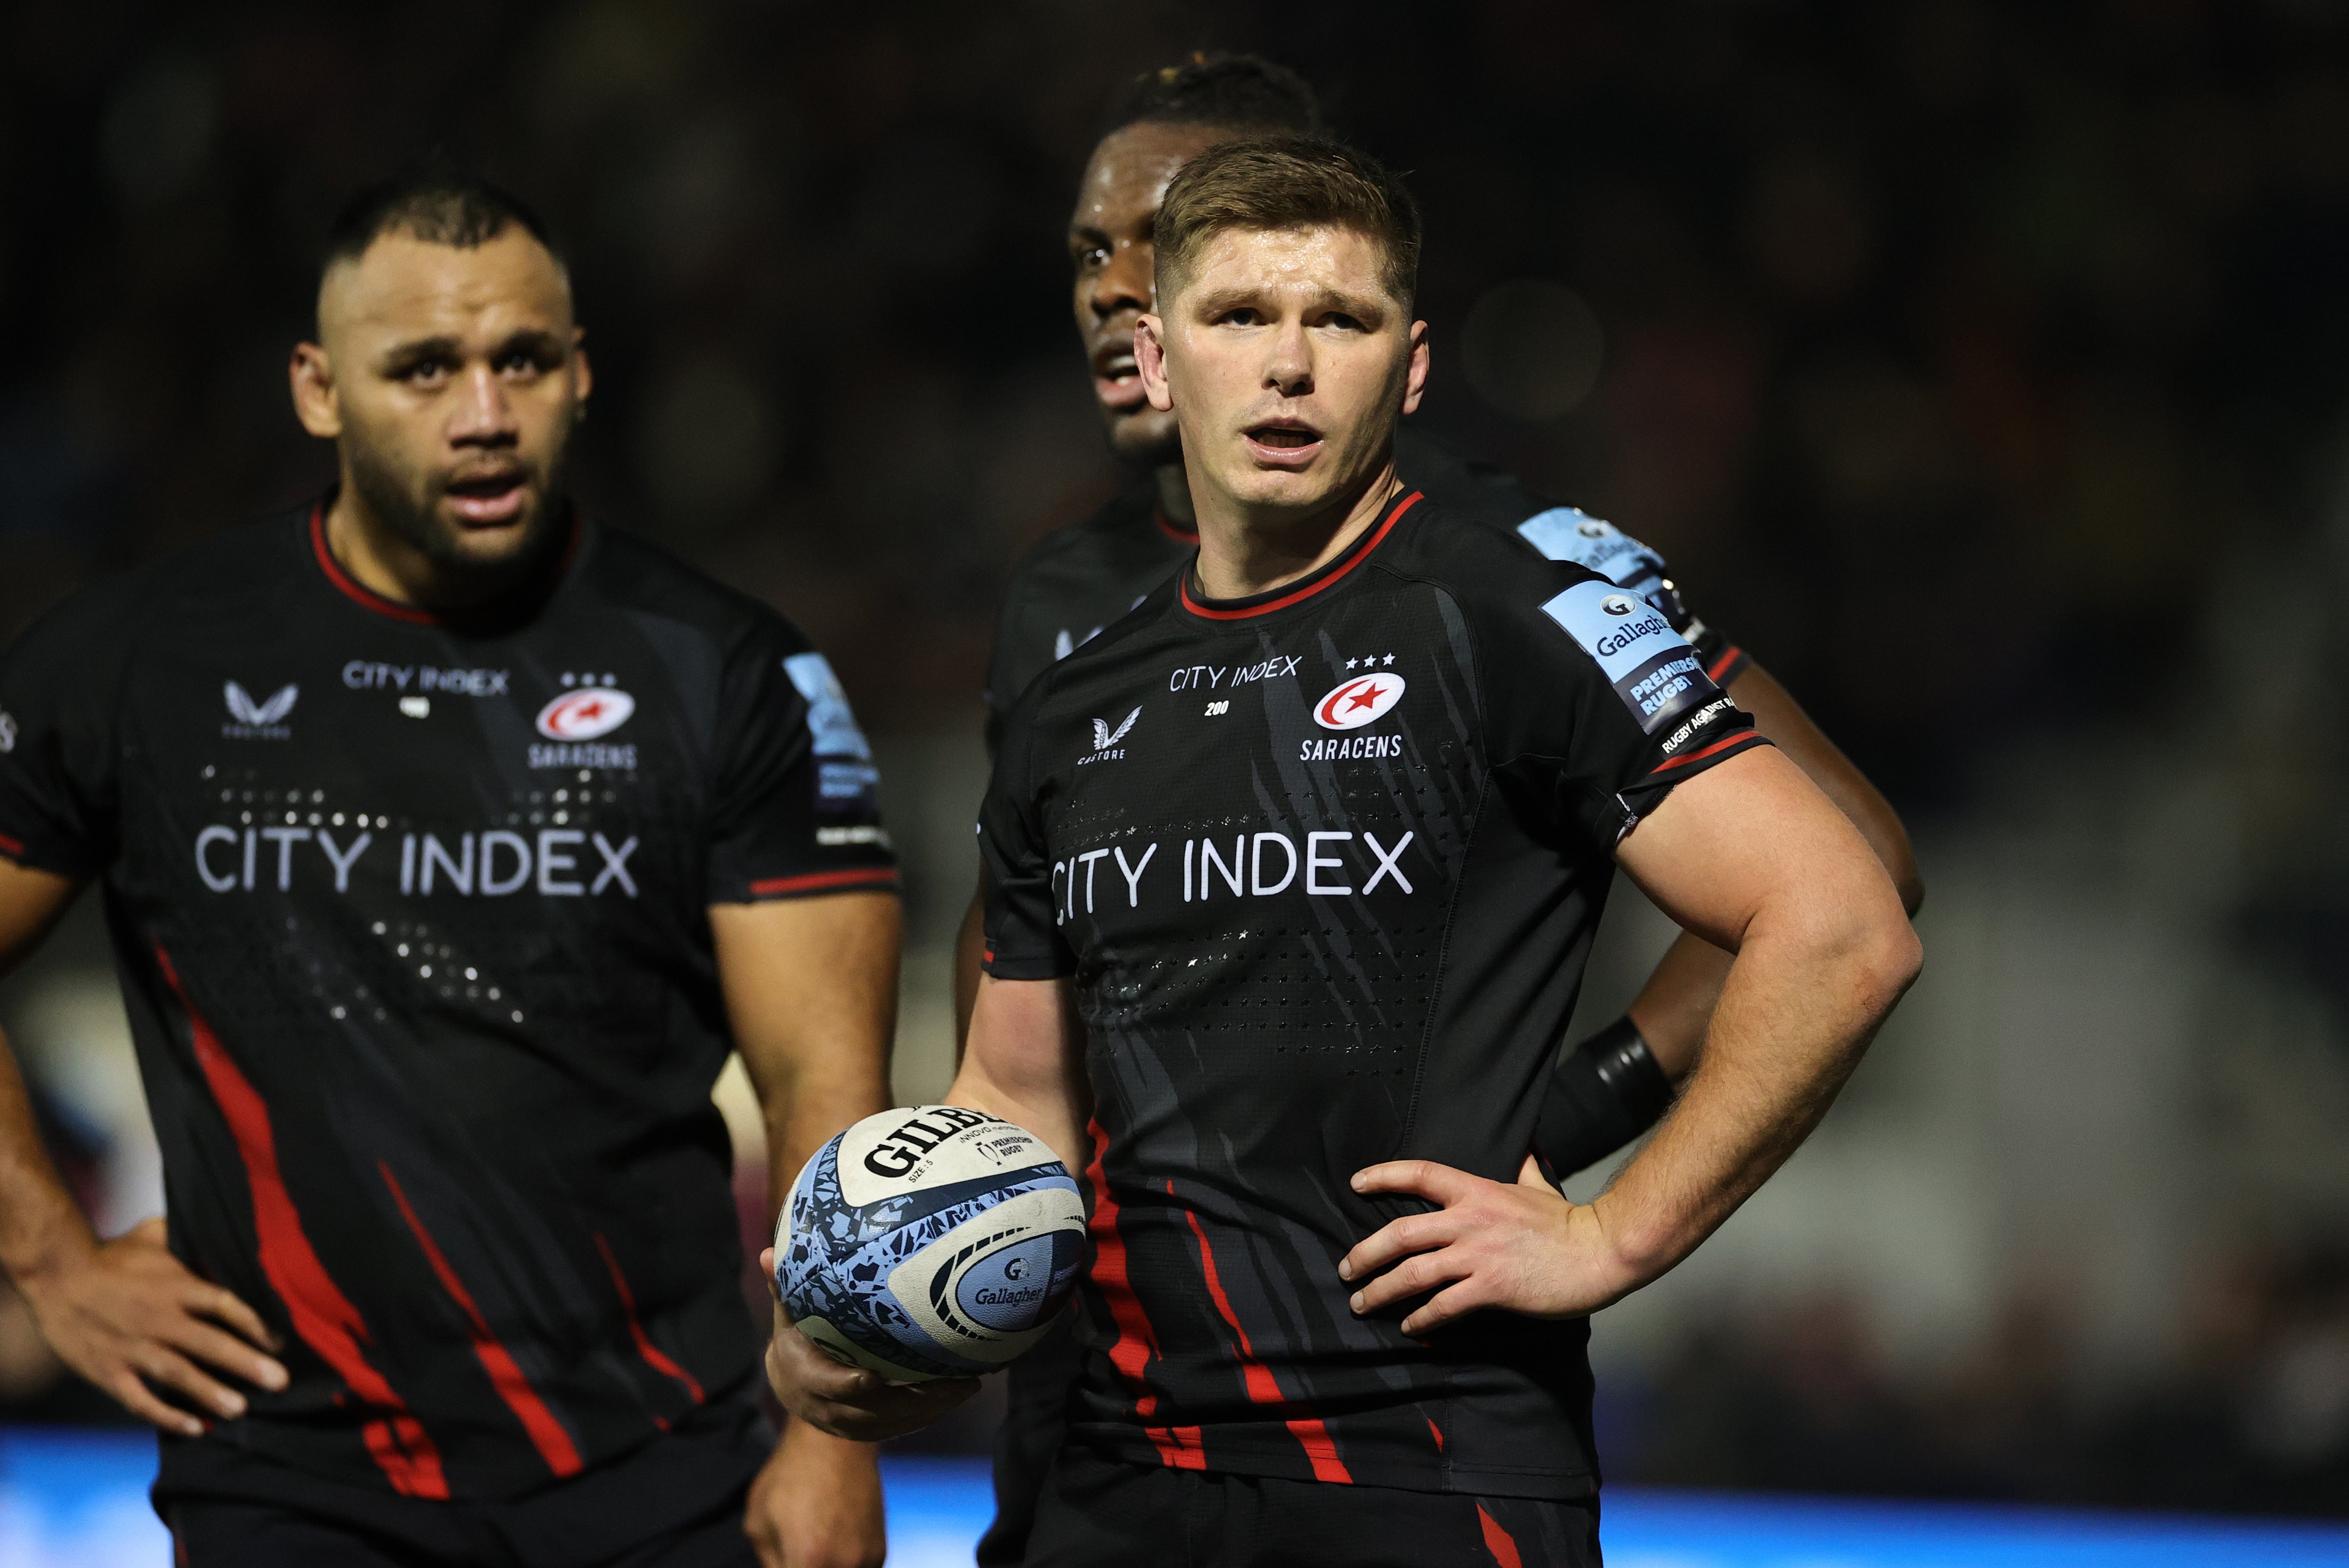 Owen Farrell had been expected to re-sign with Saracens